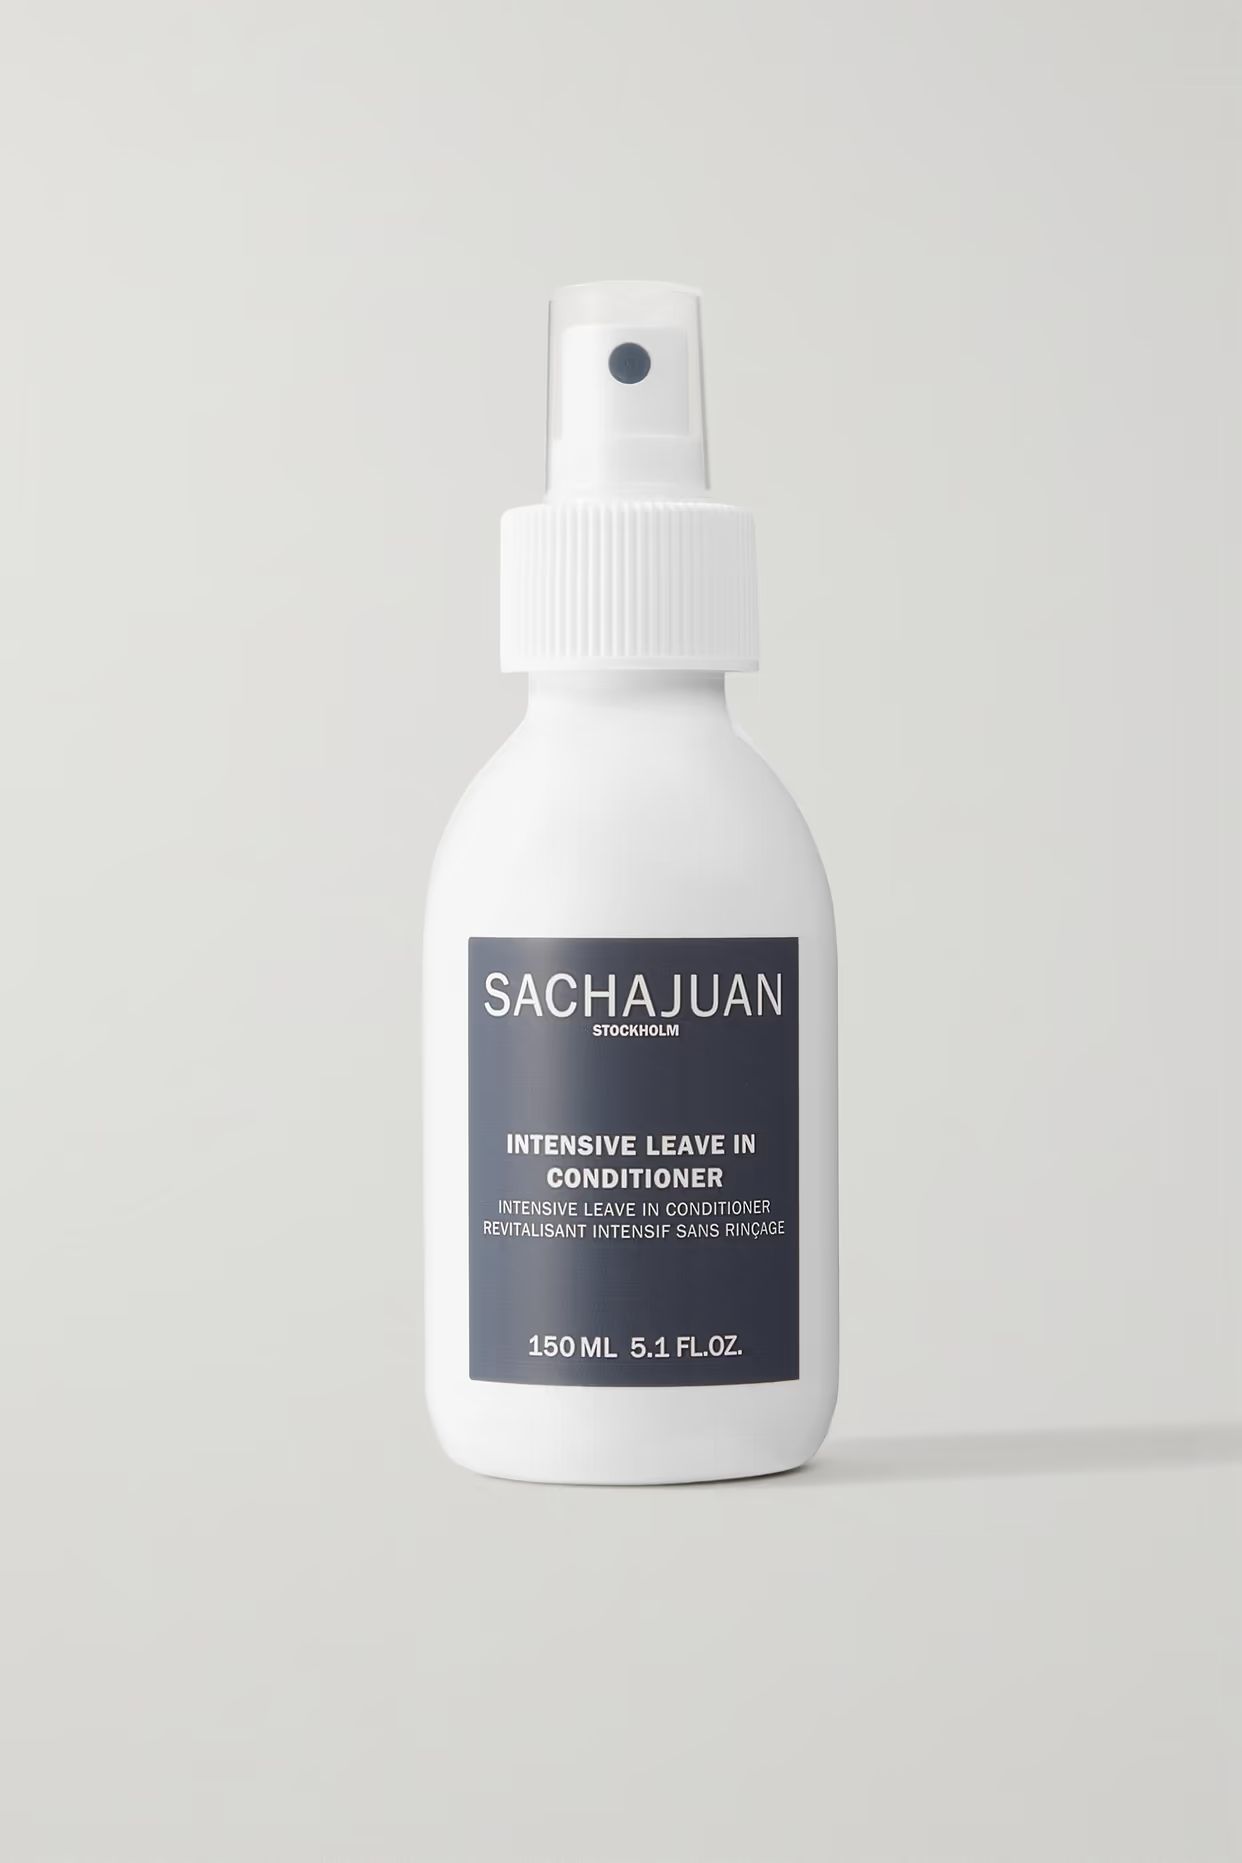 SACHAJUAN - Intensive Leave In Conditioner, 150ml - one size | NET-A-PORTER (US)